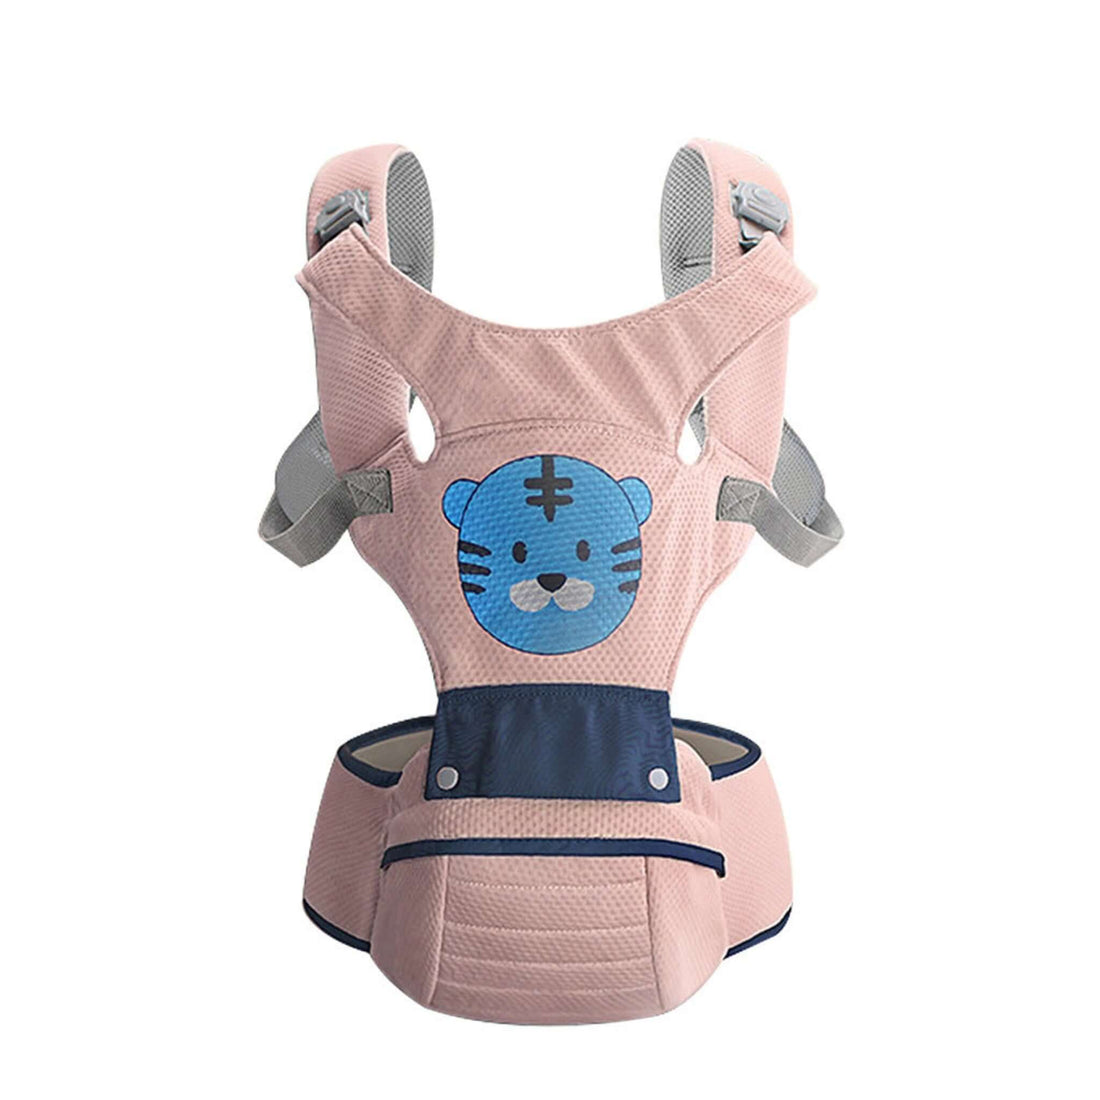 Hands-free baby carrying with waist stool